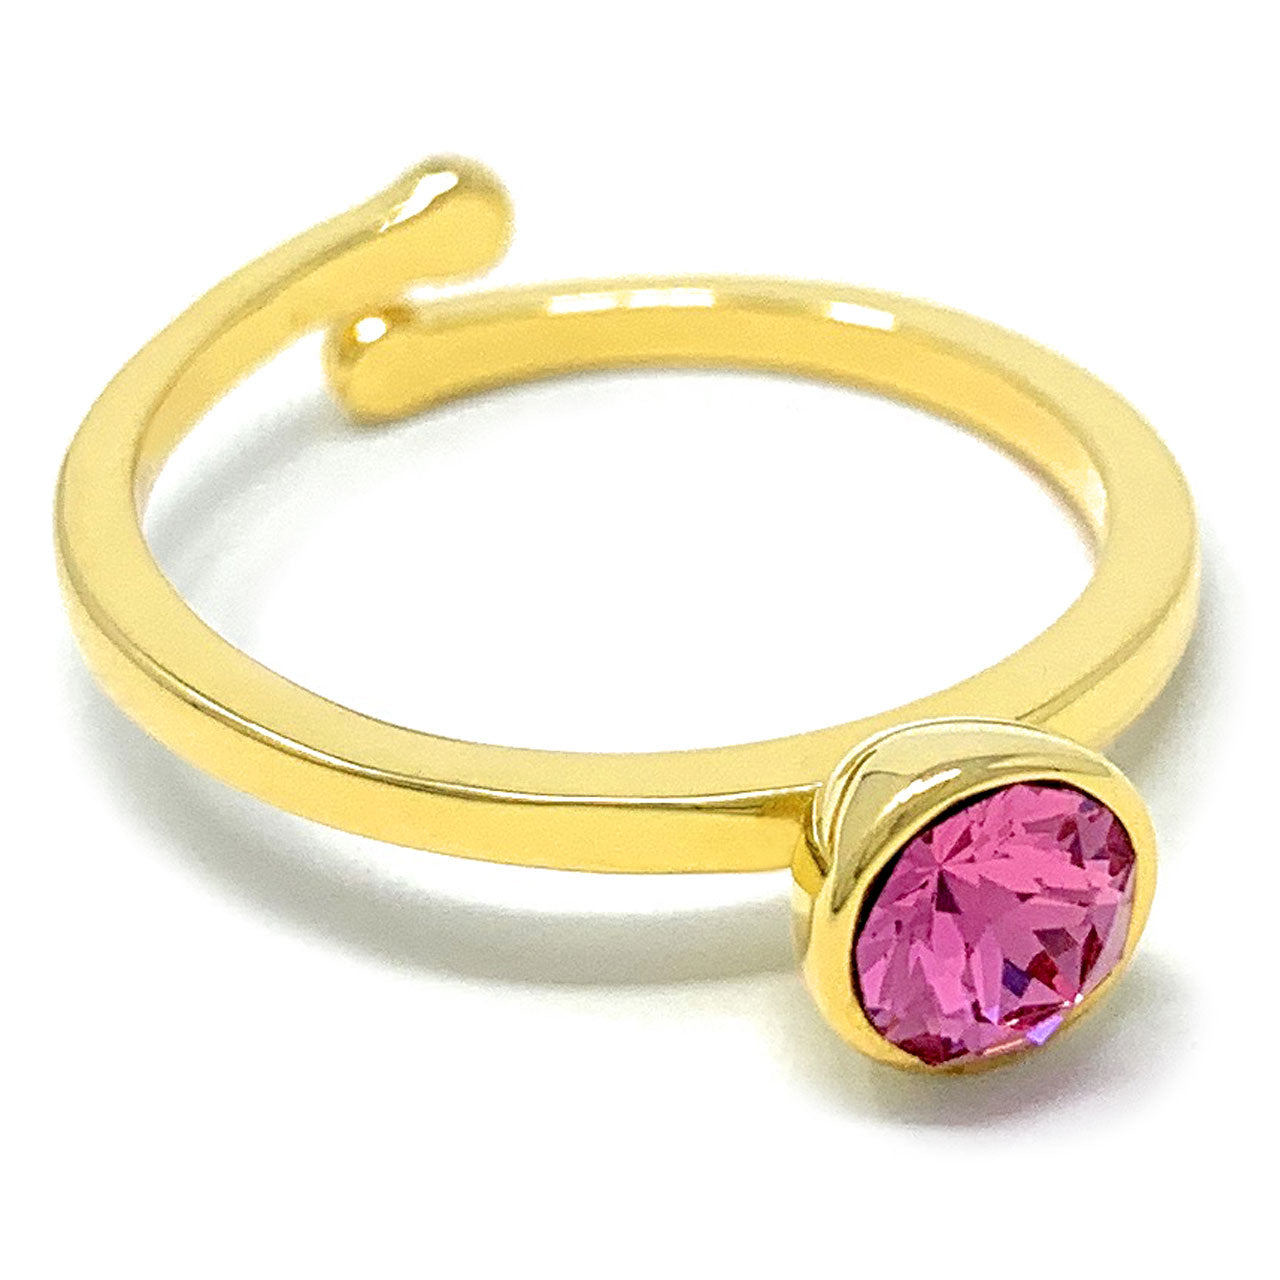 Harley Adjustable Ring with Pink Rose Round Crystals from Swarovski Gold Plated - Ed Heart